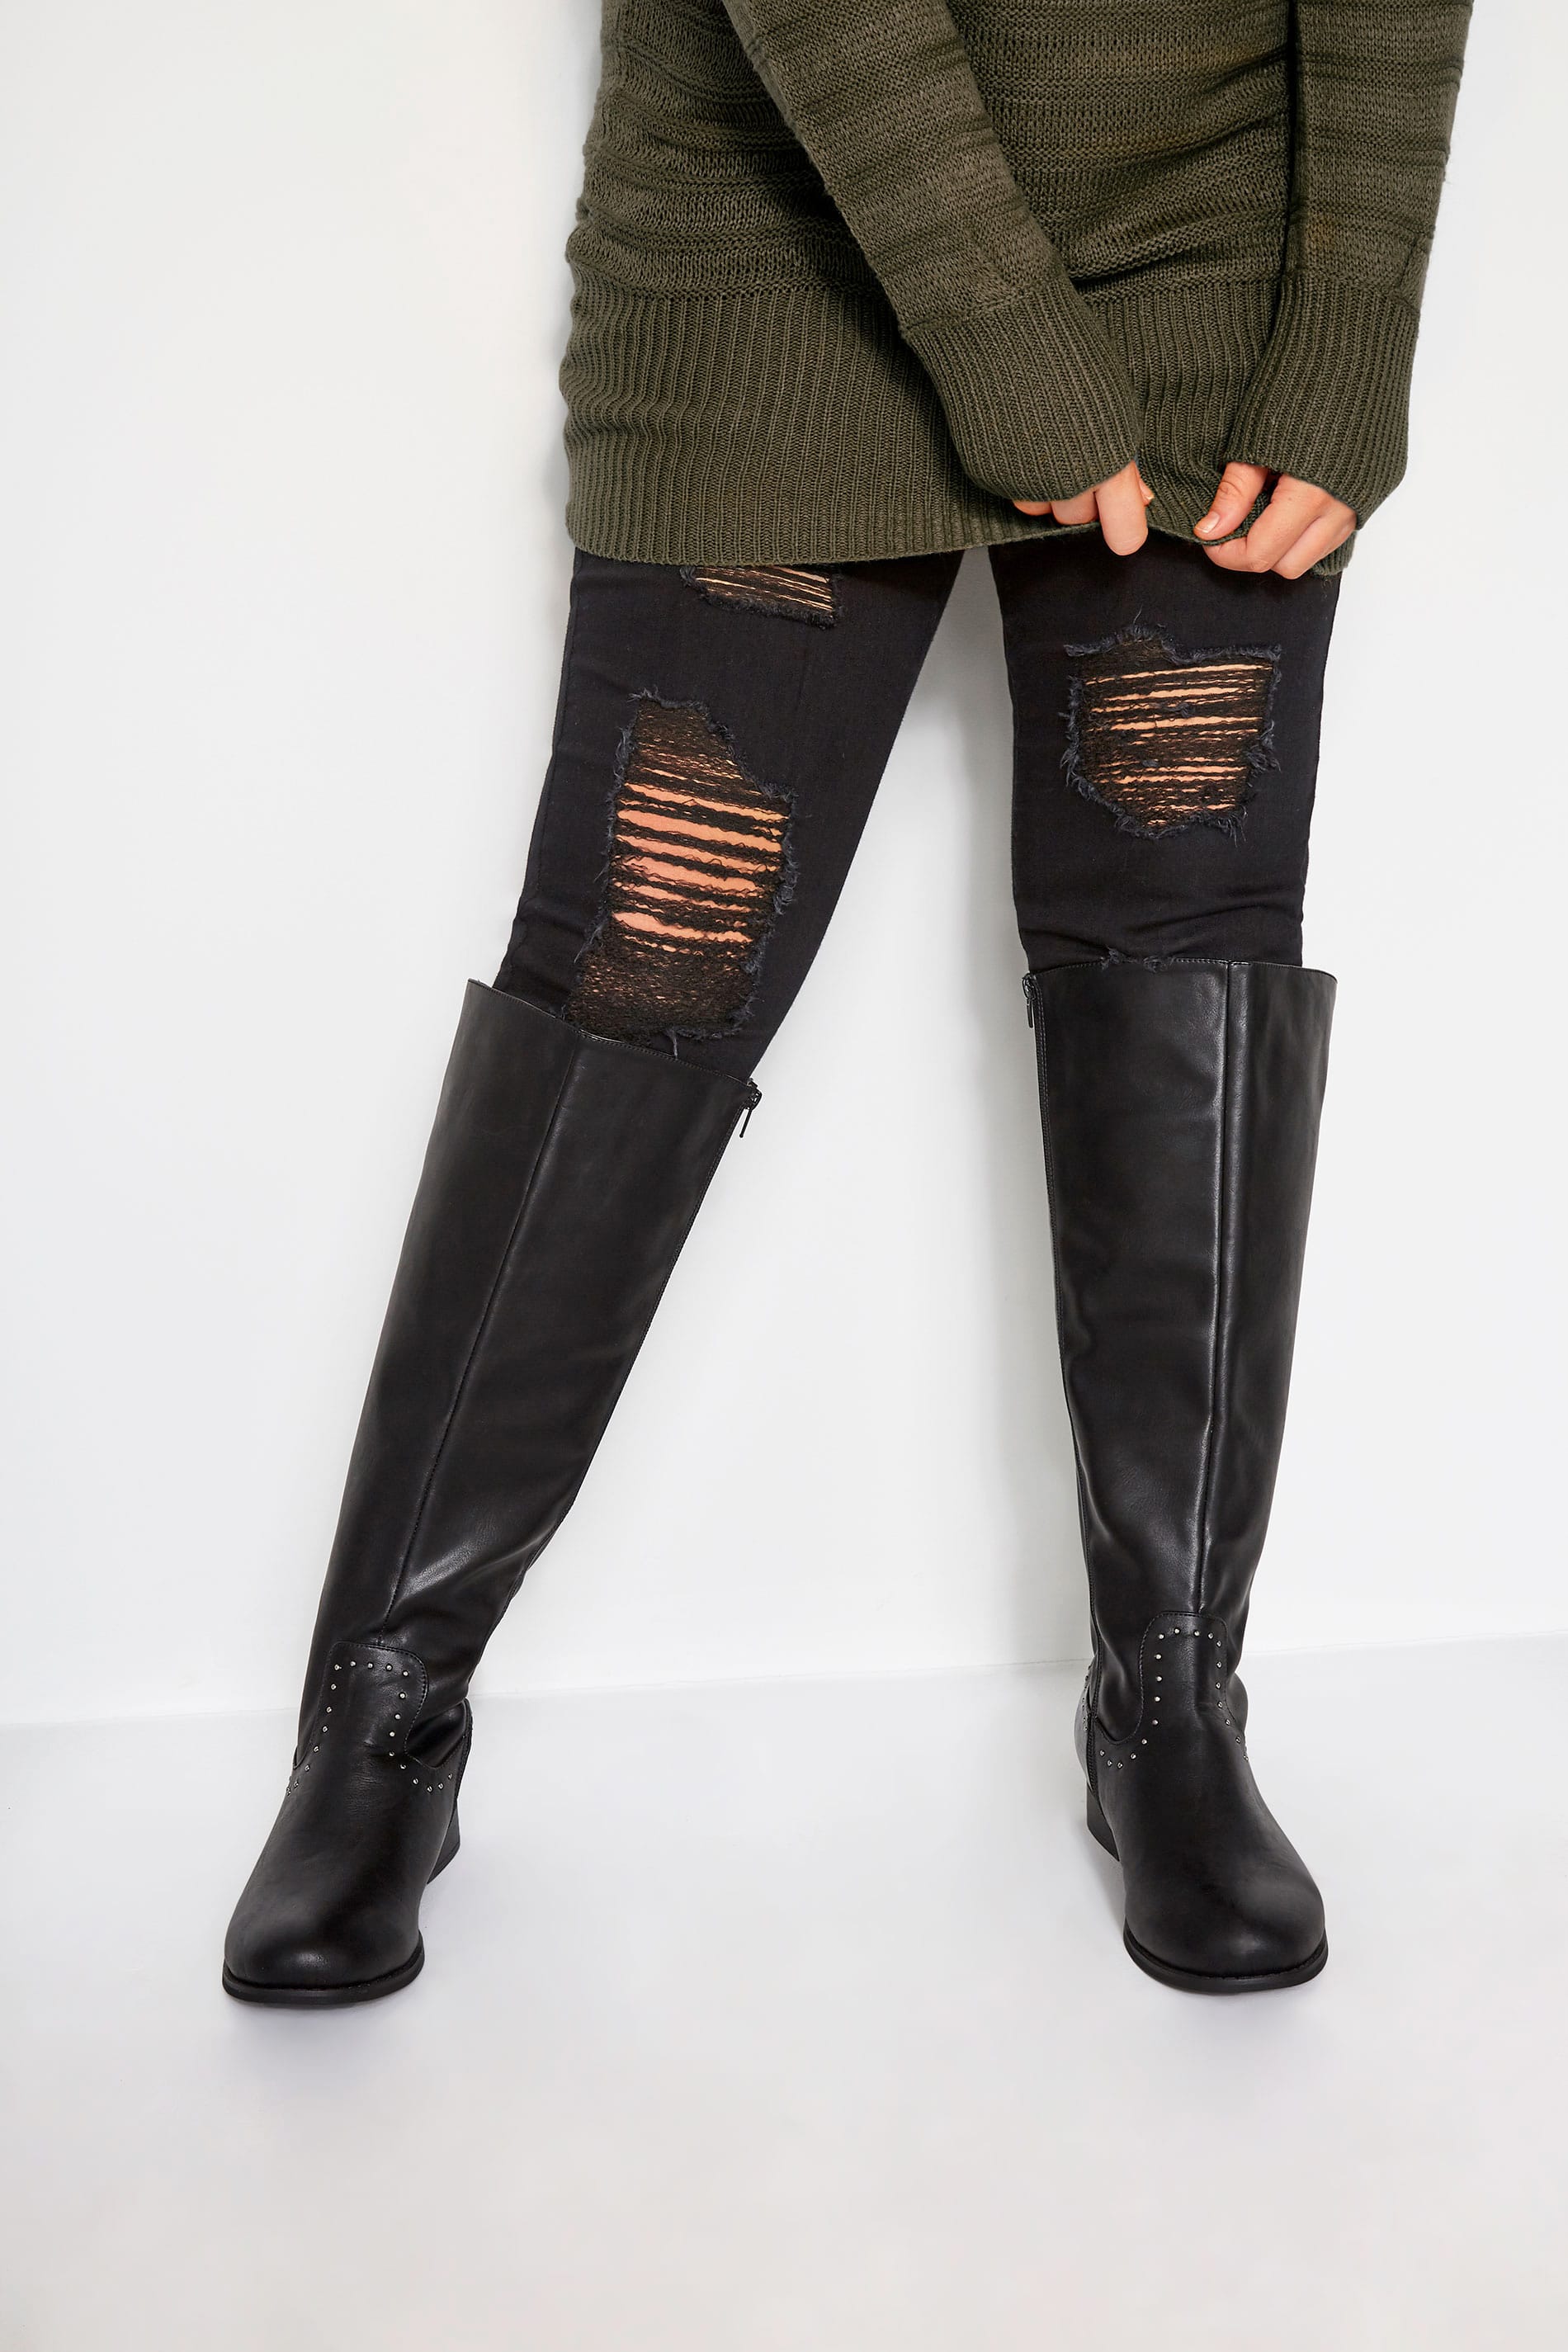 extra wide knee high boots